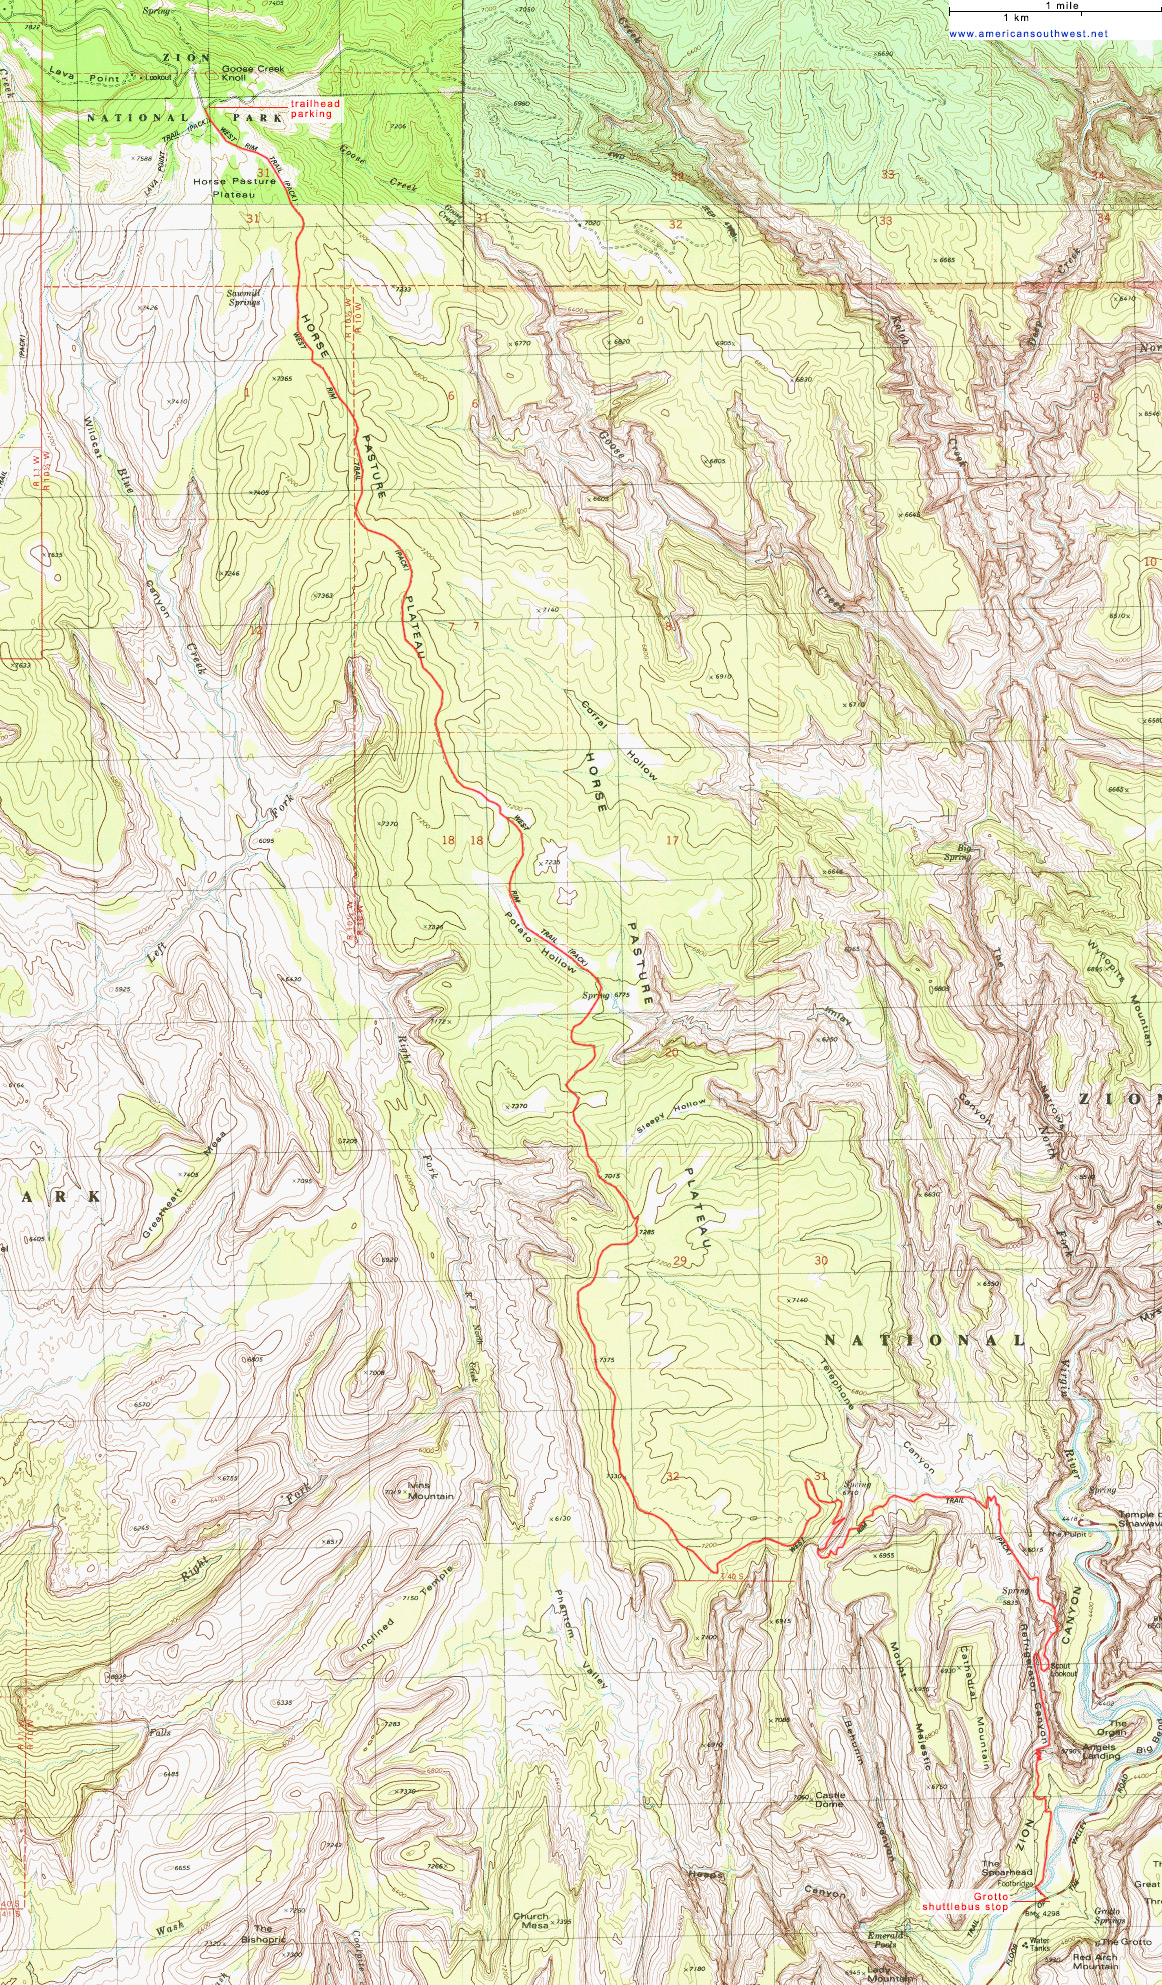 Topographic Map of the West Rim Trail, Zion National Park